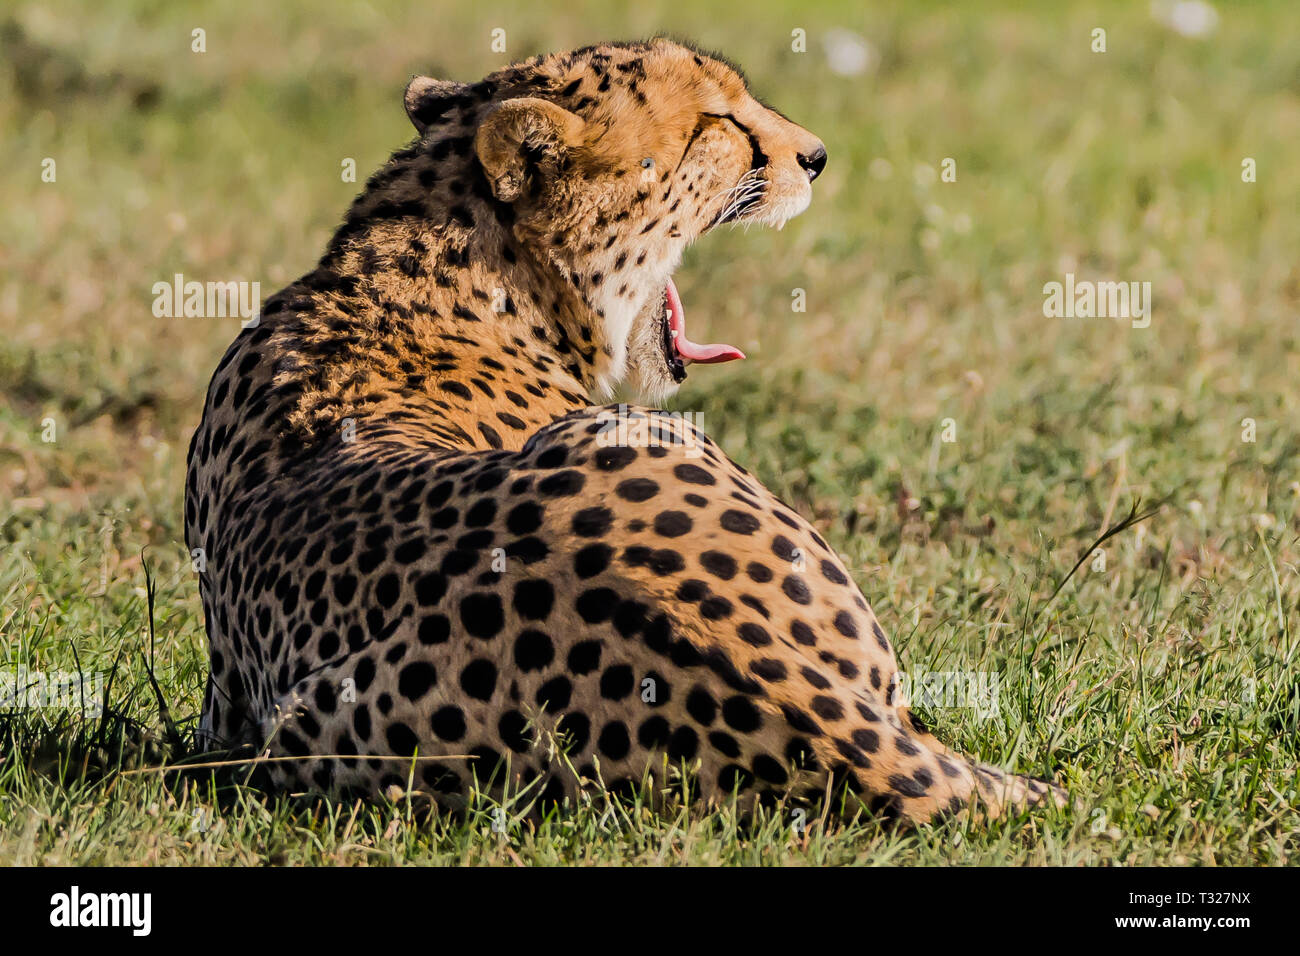 A Cheetah with mouth wide open Stock Photo